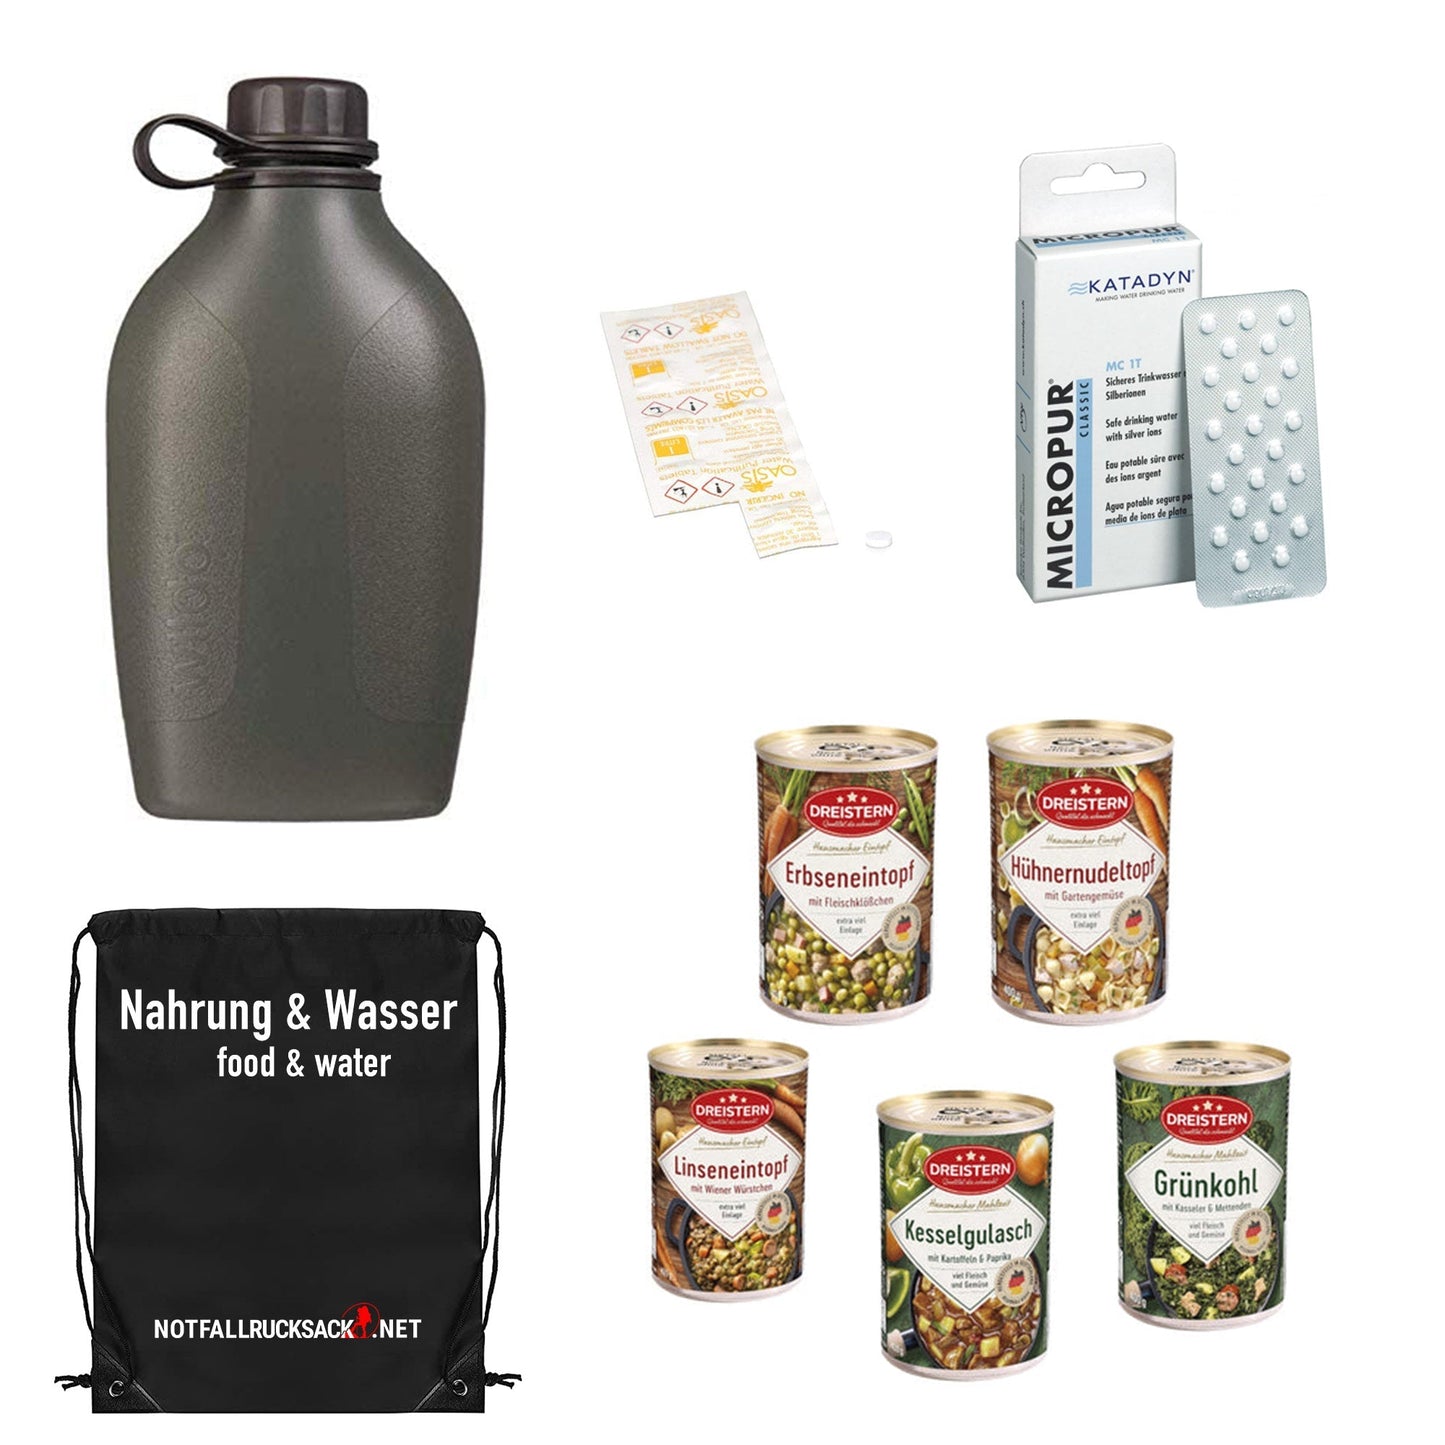 Survival pack backpack filled - including food, sleeping, first aid -